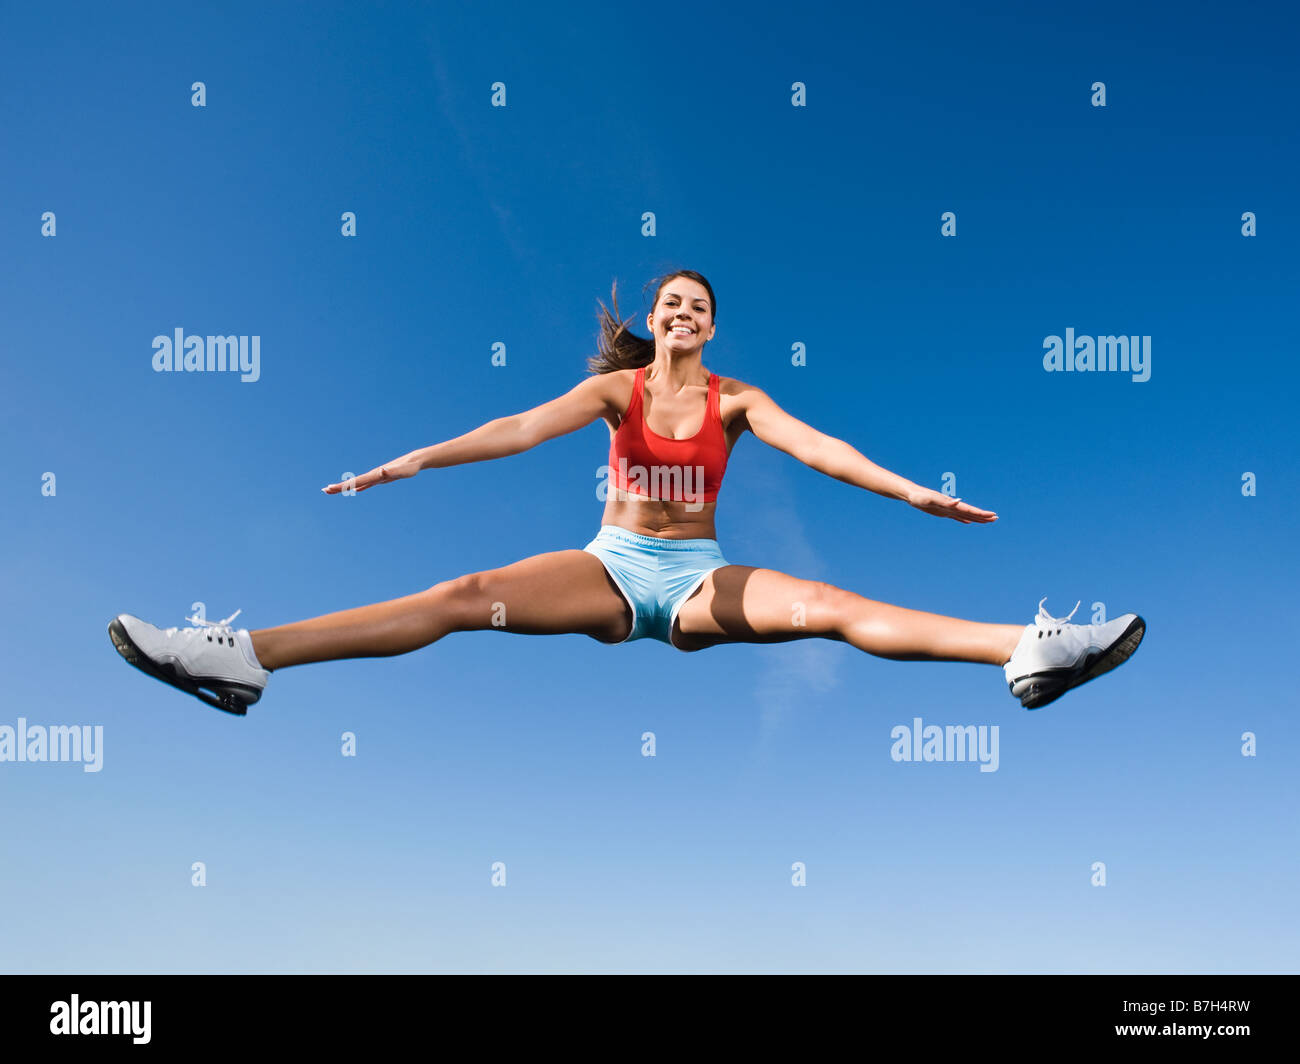 Native American woman jumping in mid-air Stock Photo